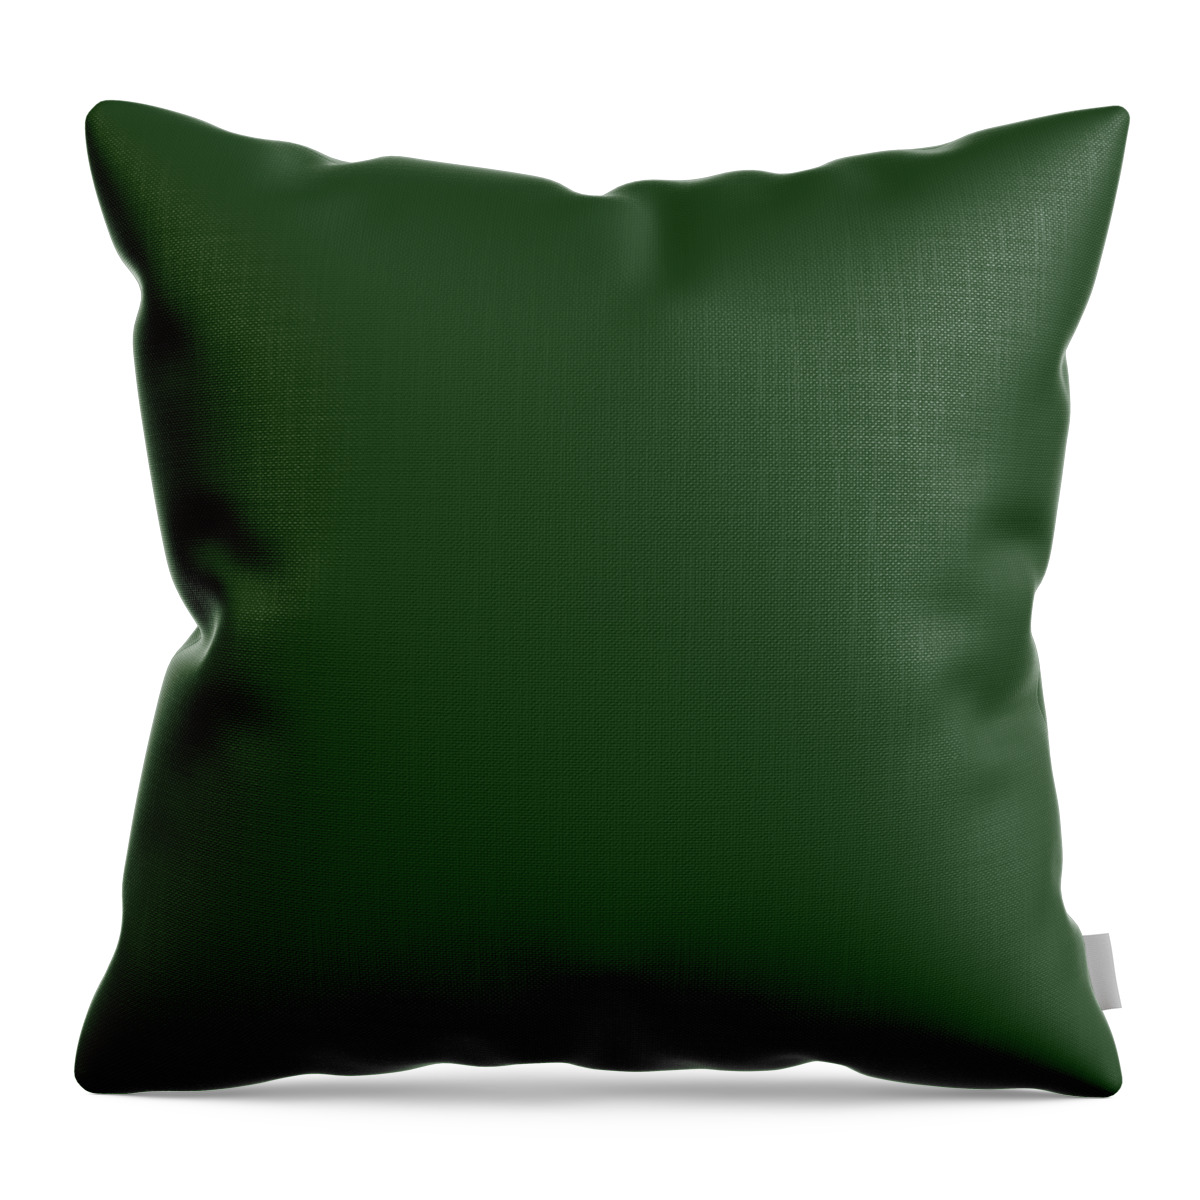 Myrtle Throw Pillow featuring the digital art Myrtle by TintoDesigns